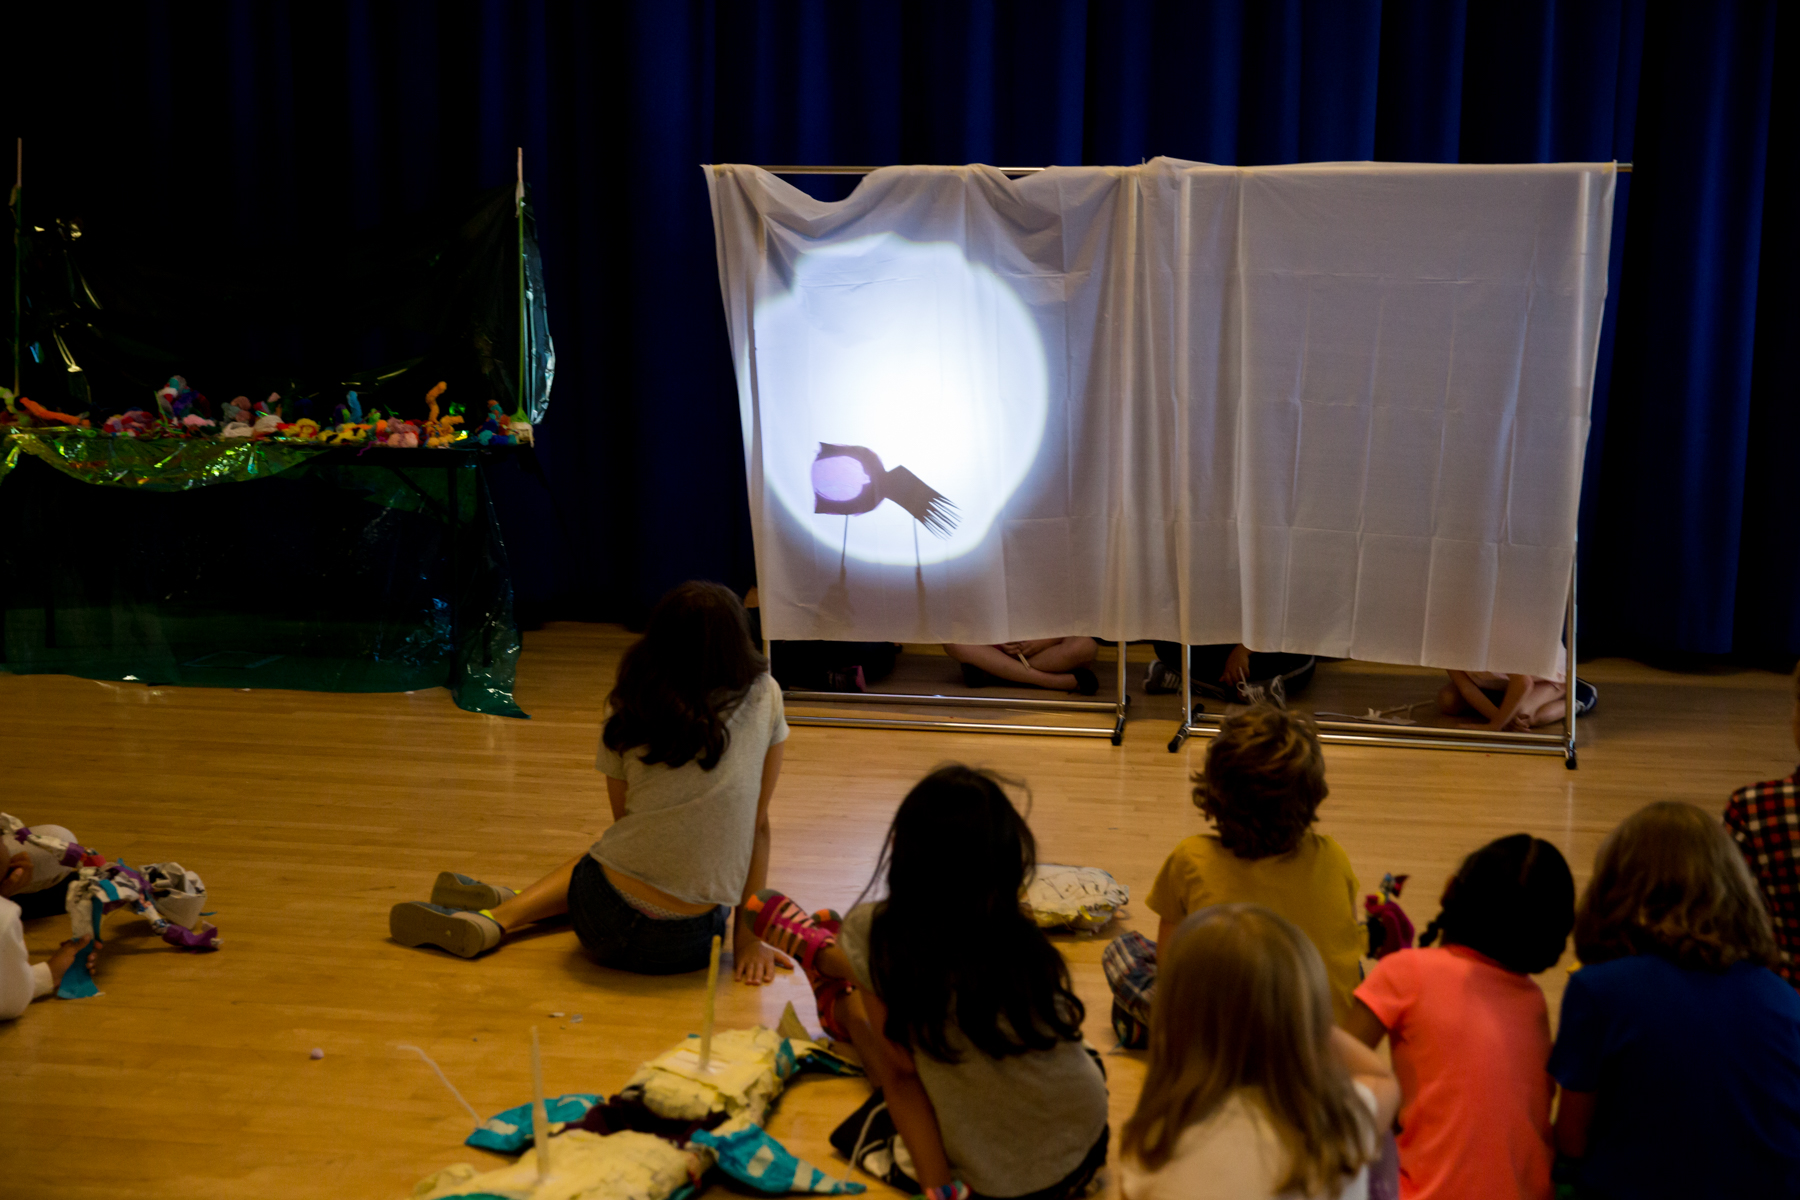 A group of people on the ground watch a shadow puppet performance on a white screen, with a table full of puppetry materials to the left of the screen.